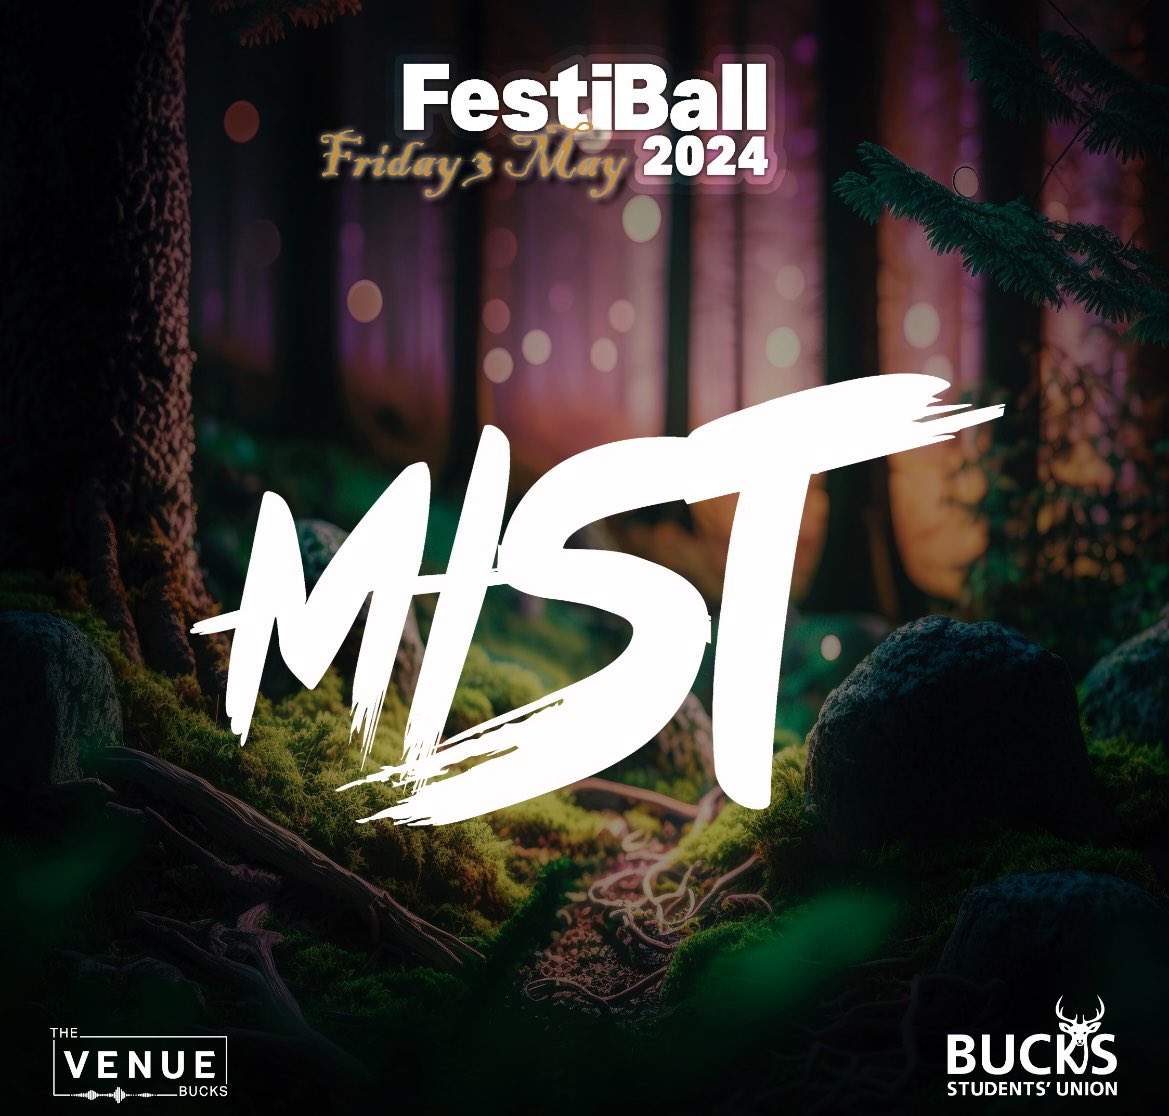 FestiBall 2024 announcement 📣 Mist will be starting Festiball as our headliner for Friday 3rd May🤩 Mist is a rapper who is famous for his song ‘So High’ featuring Fredo and ‘Oh Baby’ which features Issey Cross. Public tickets are available through the link in our bio 🔗